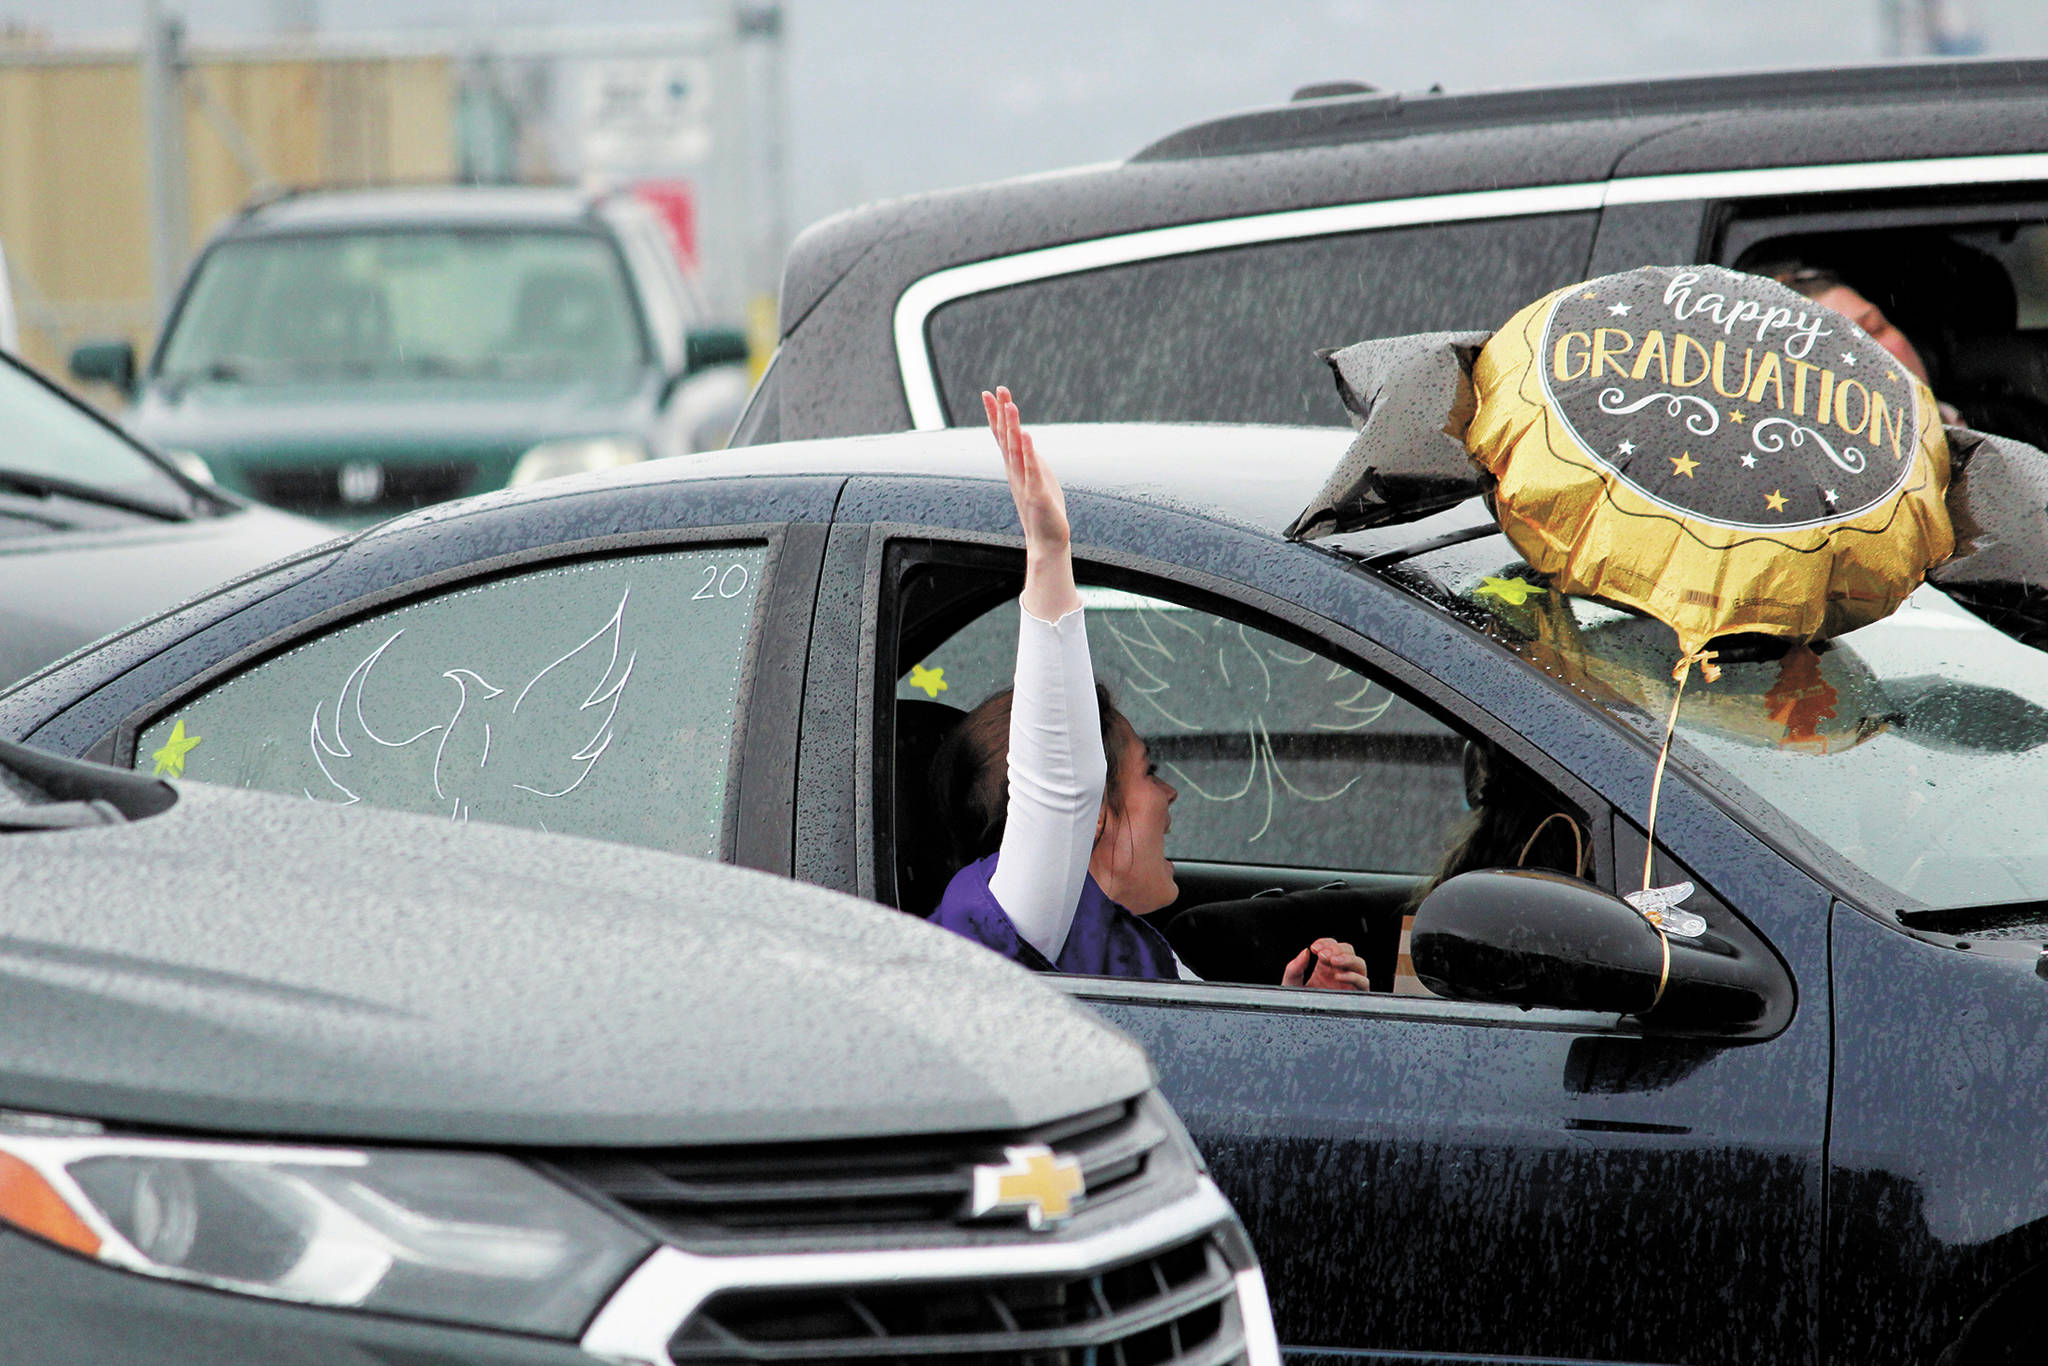 Graduate Audnia Carlson celebrates out her car window during a Monday, May 18, 2020 commencement ceremony for Homer Flex School at the Homer Harbor in Homer, Alaska. (Photo by Megan Pacer/Homer News)